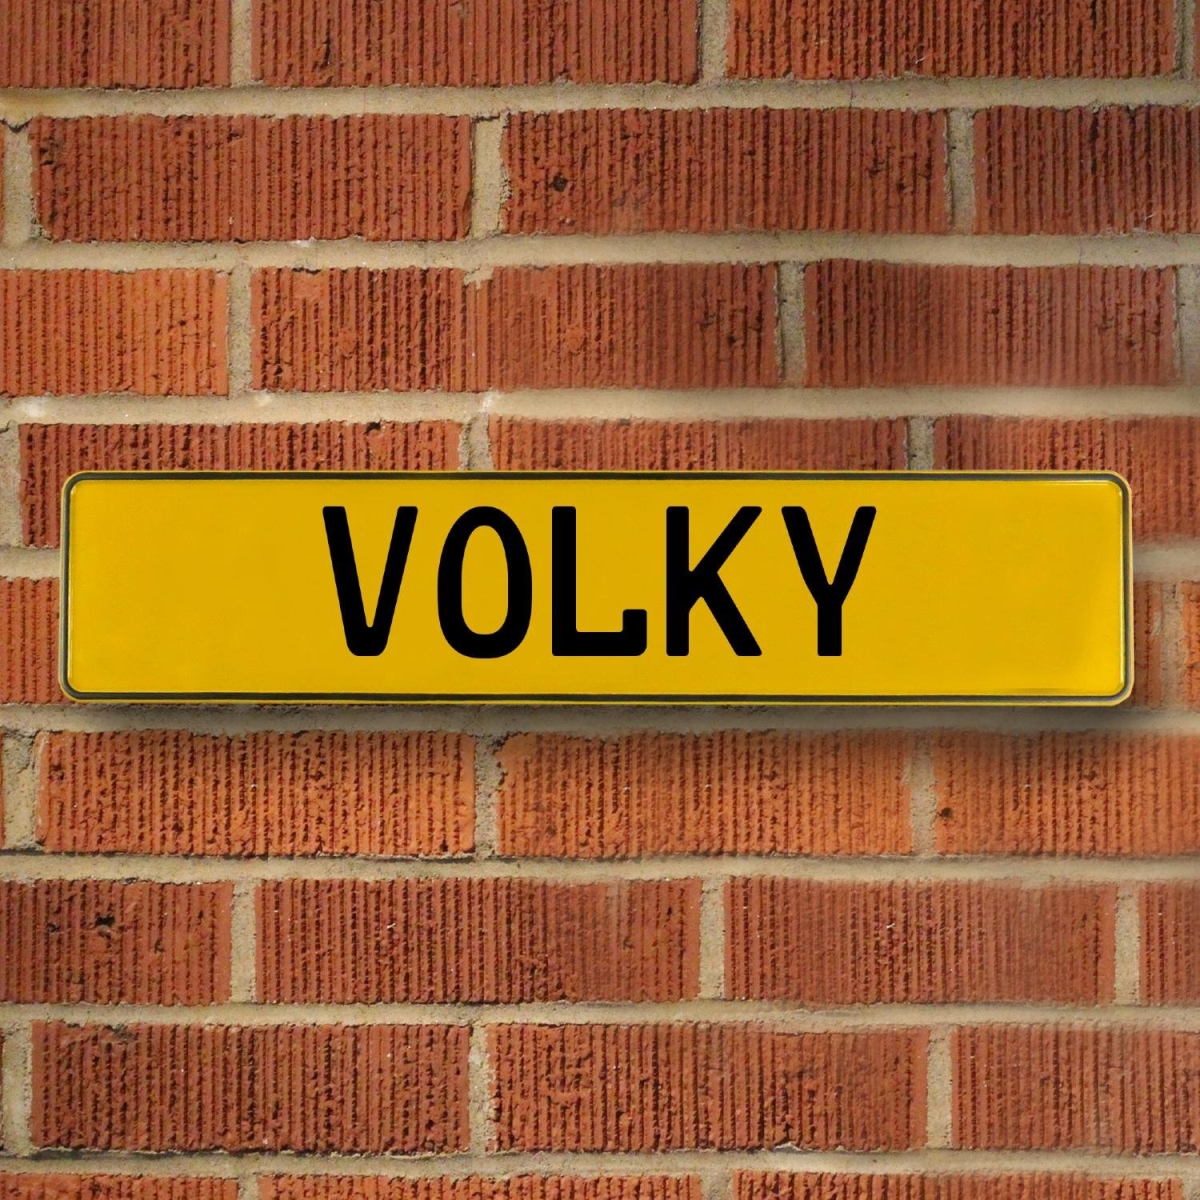 Volky - Yellow Aluminum Street Sign Mancave Euro Plate Name Door Sign Wall